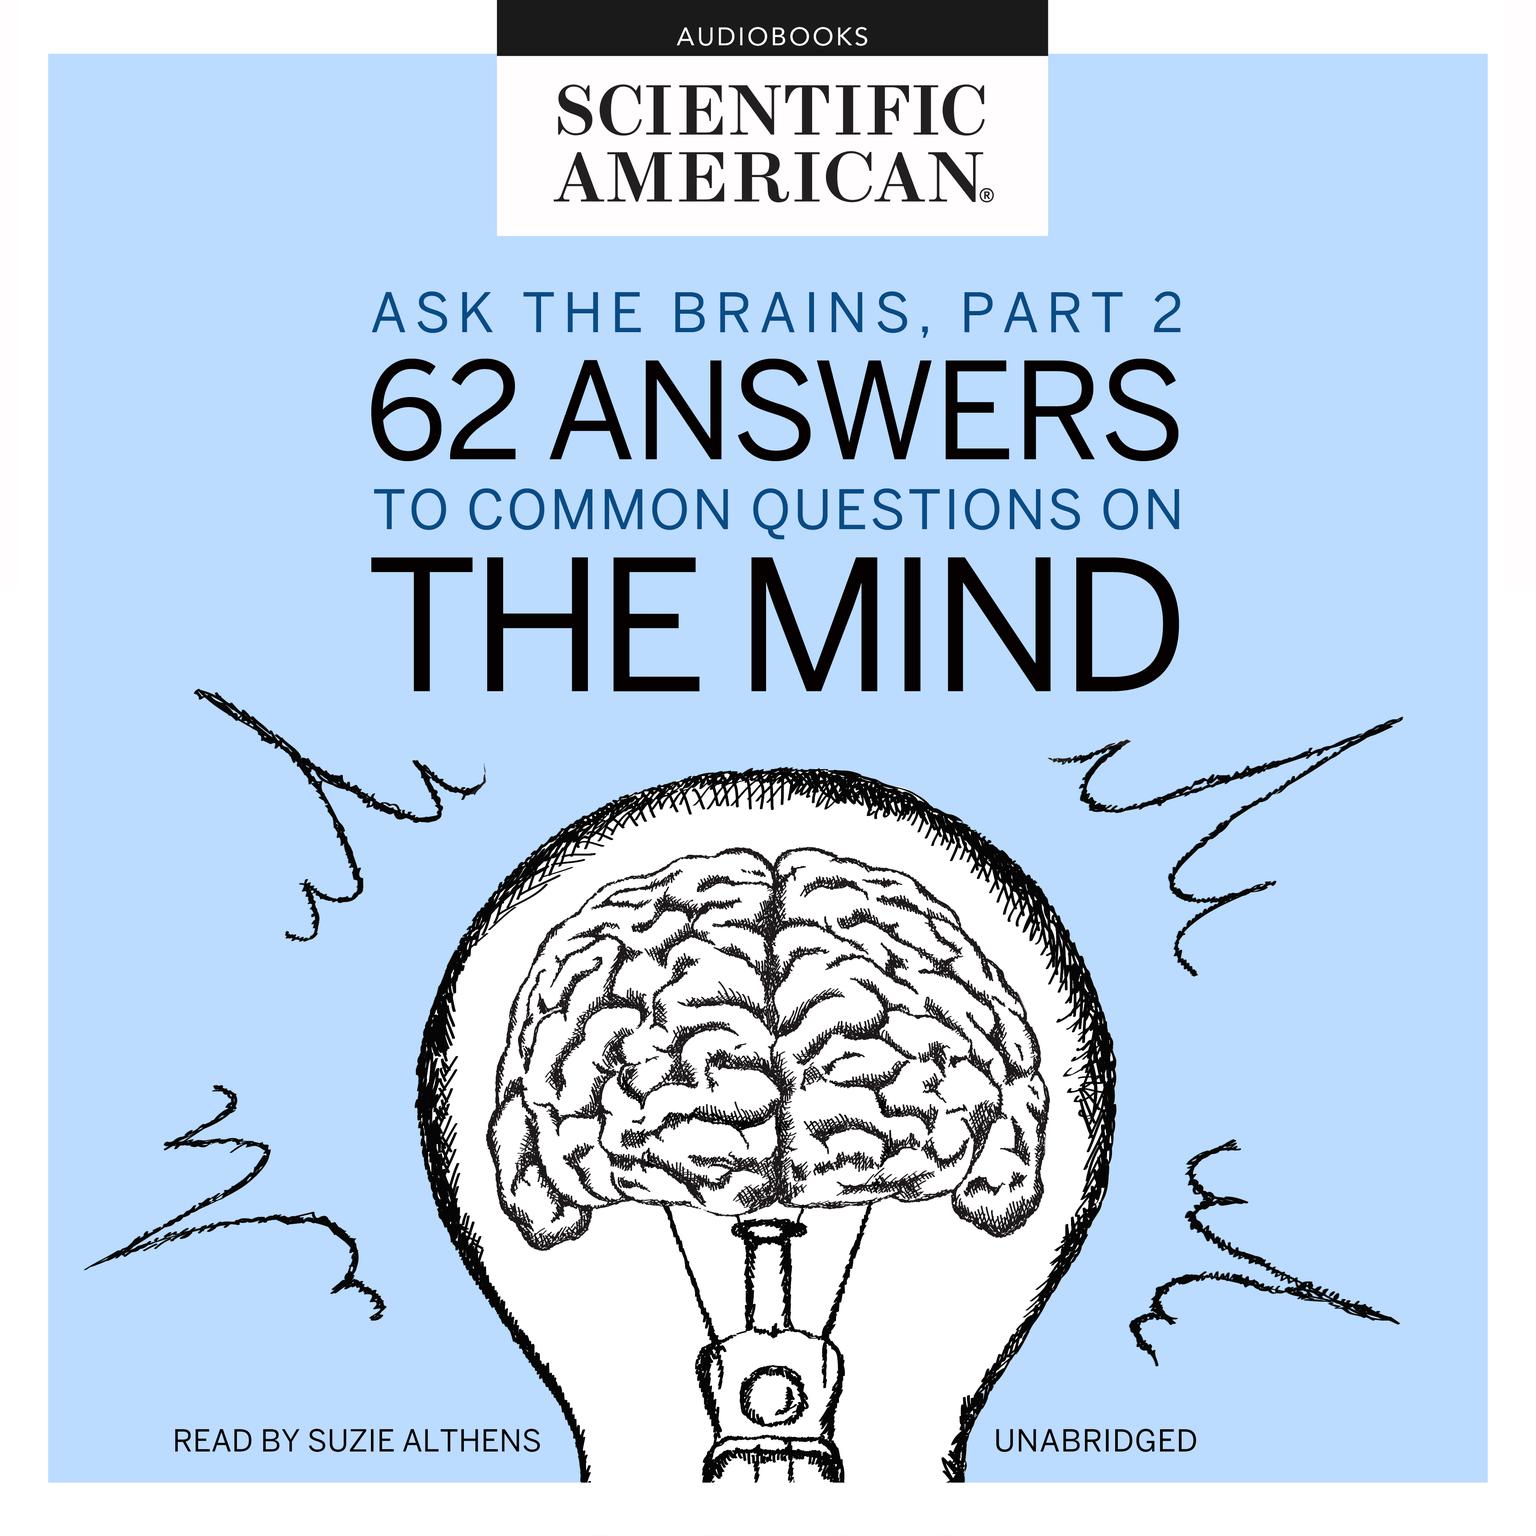 Ask the Brains, Part 2: 62 Answers to Common Questions on the Mind Audiobook, by Scientific American